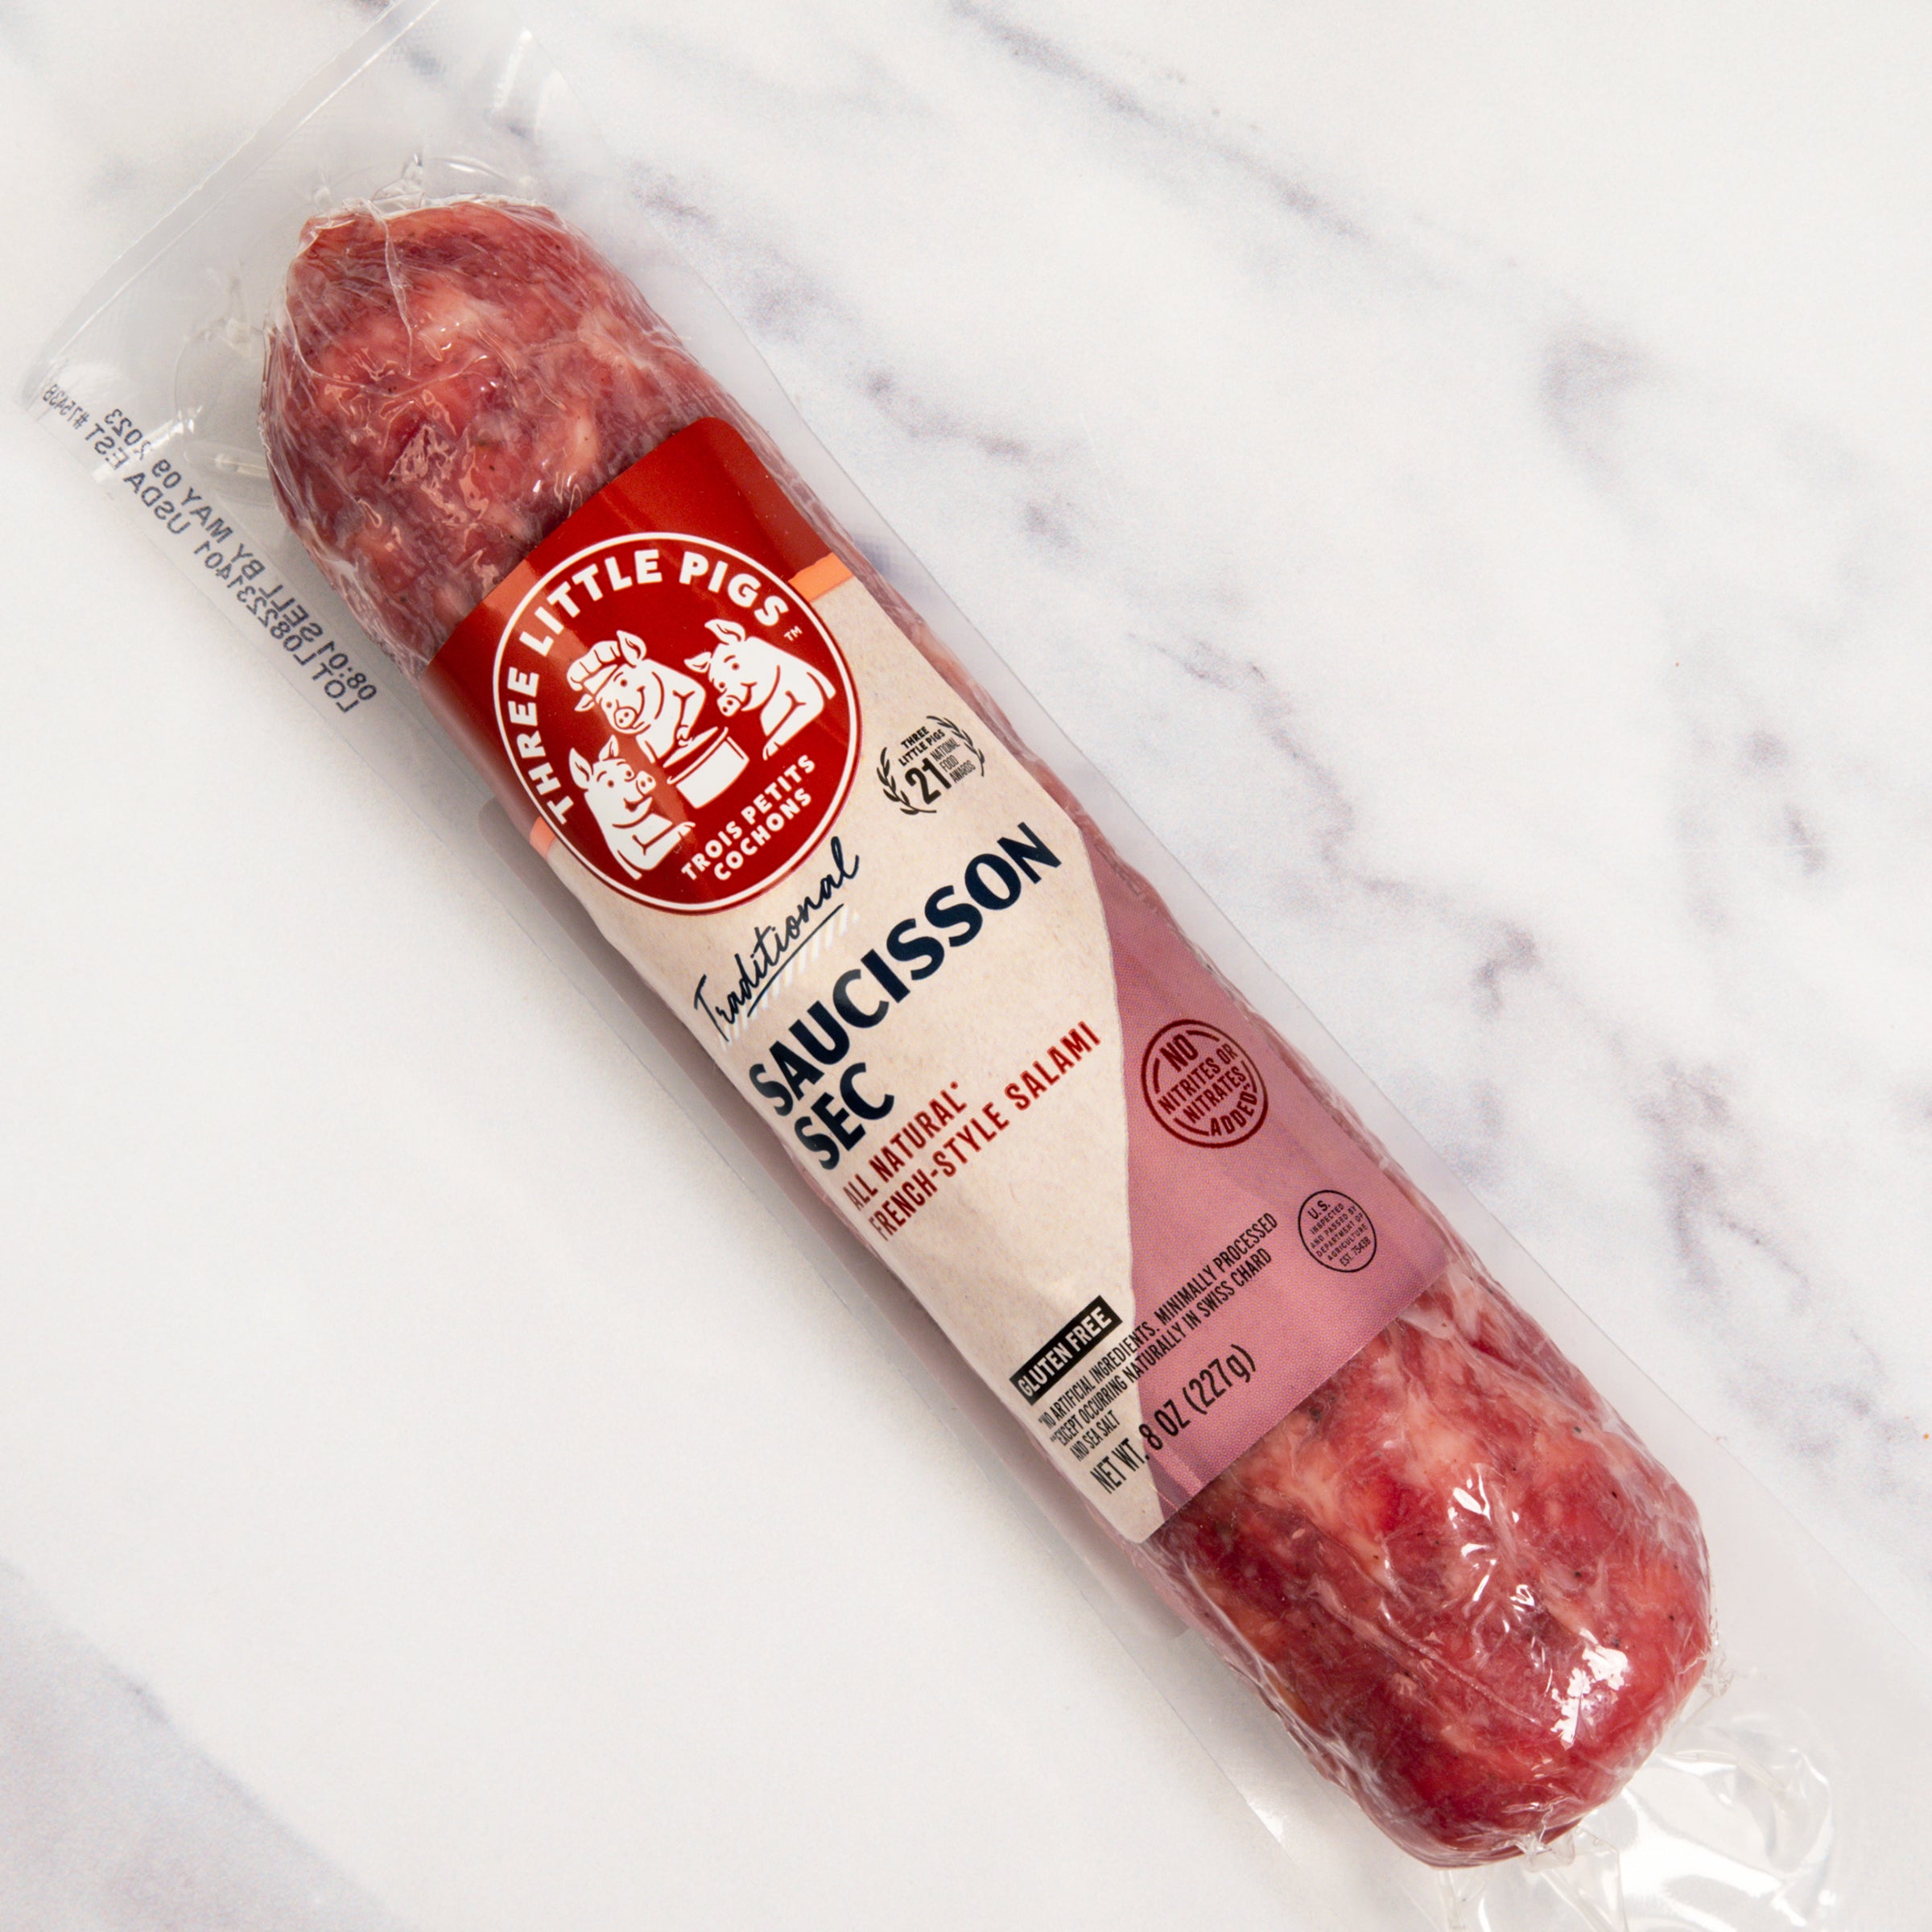 Three Little Pigs Salami, French-Style, All Natural, Traditional - 8 oz